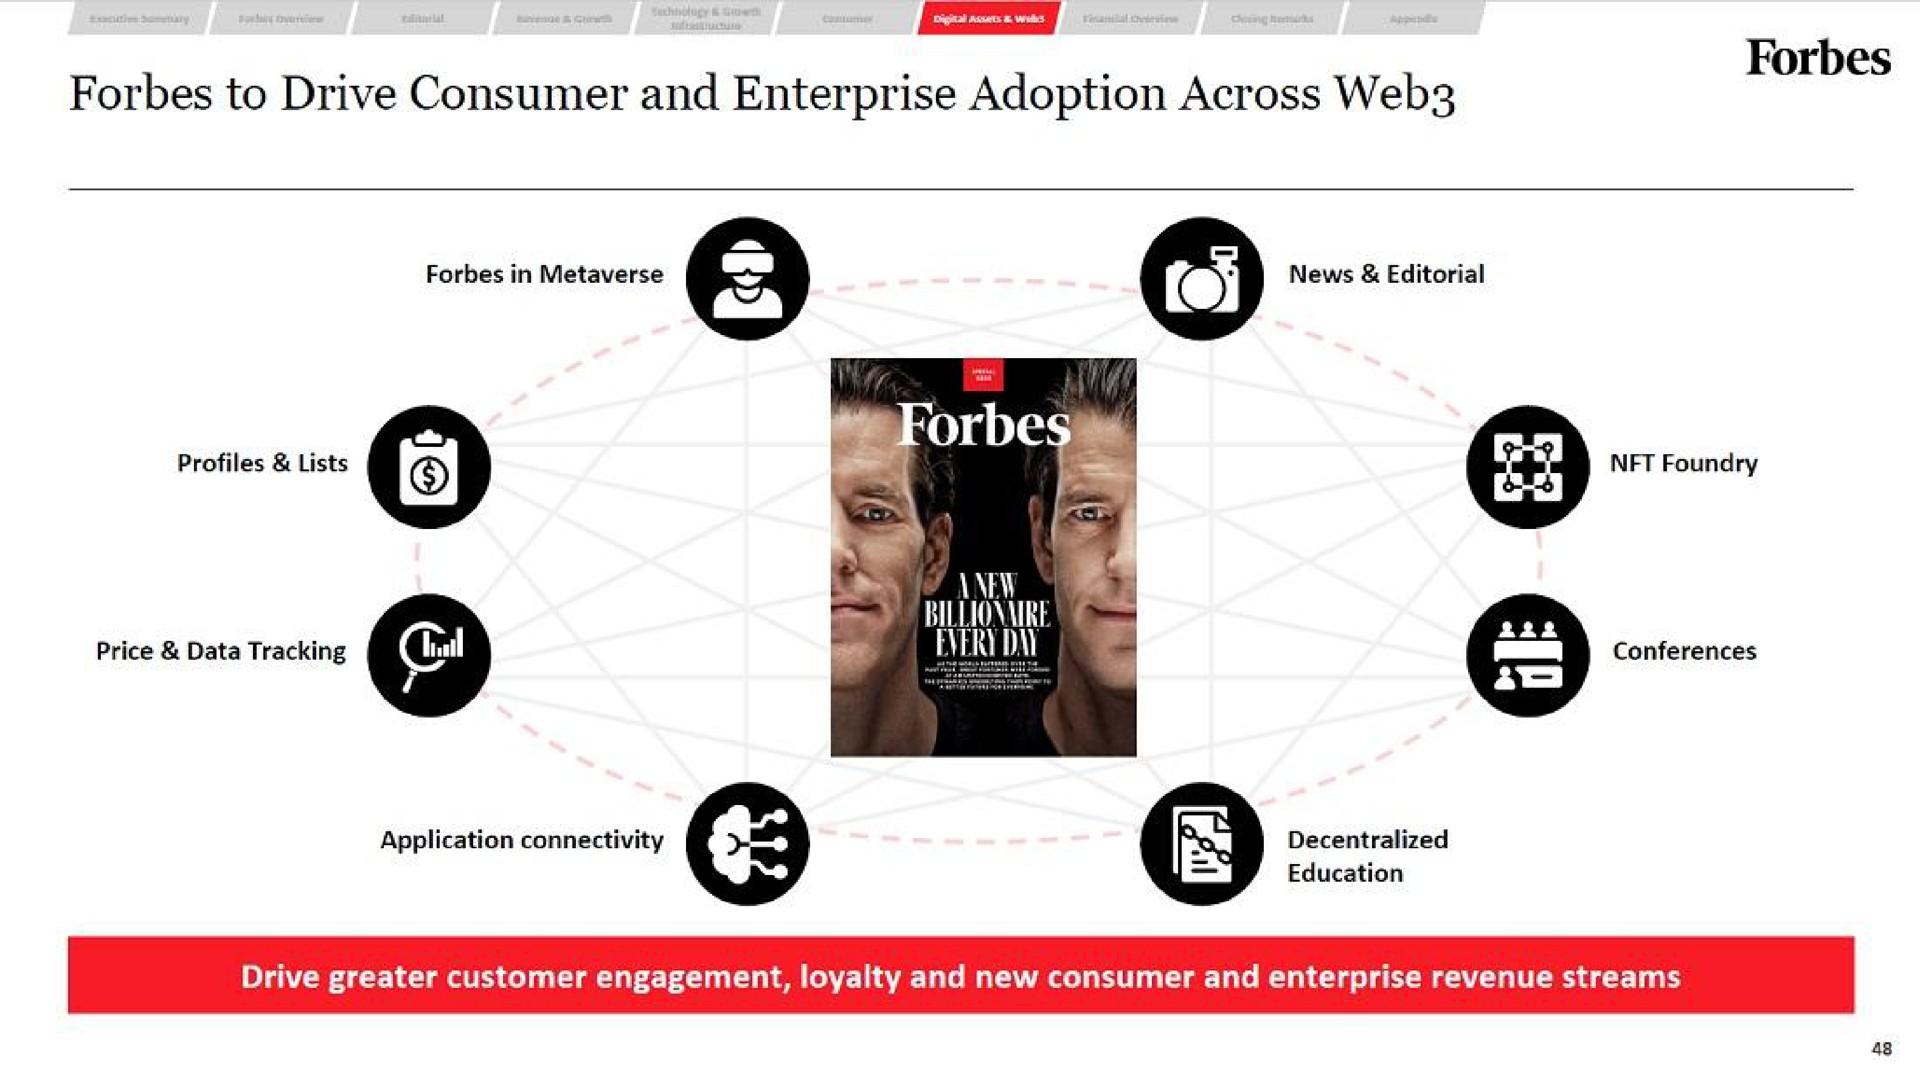 to drive consumer and enterprise adoption across web | Forbes